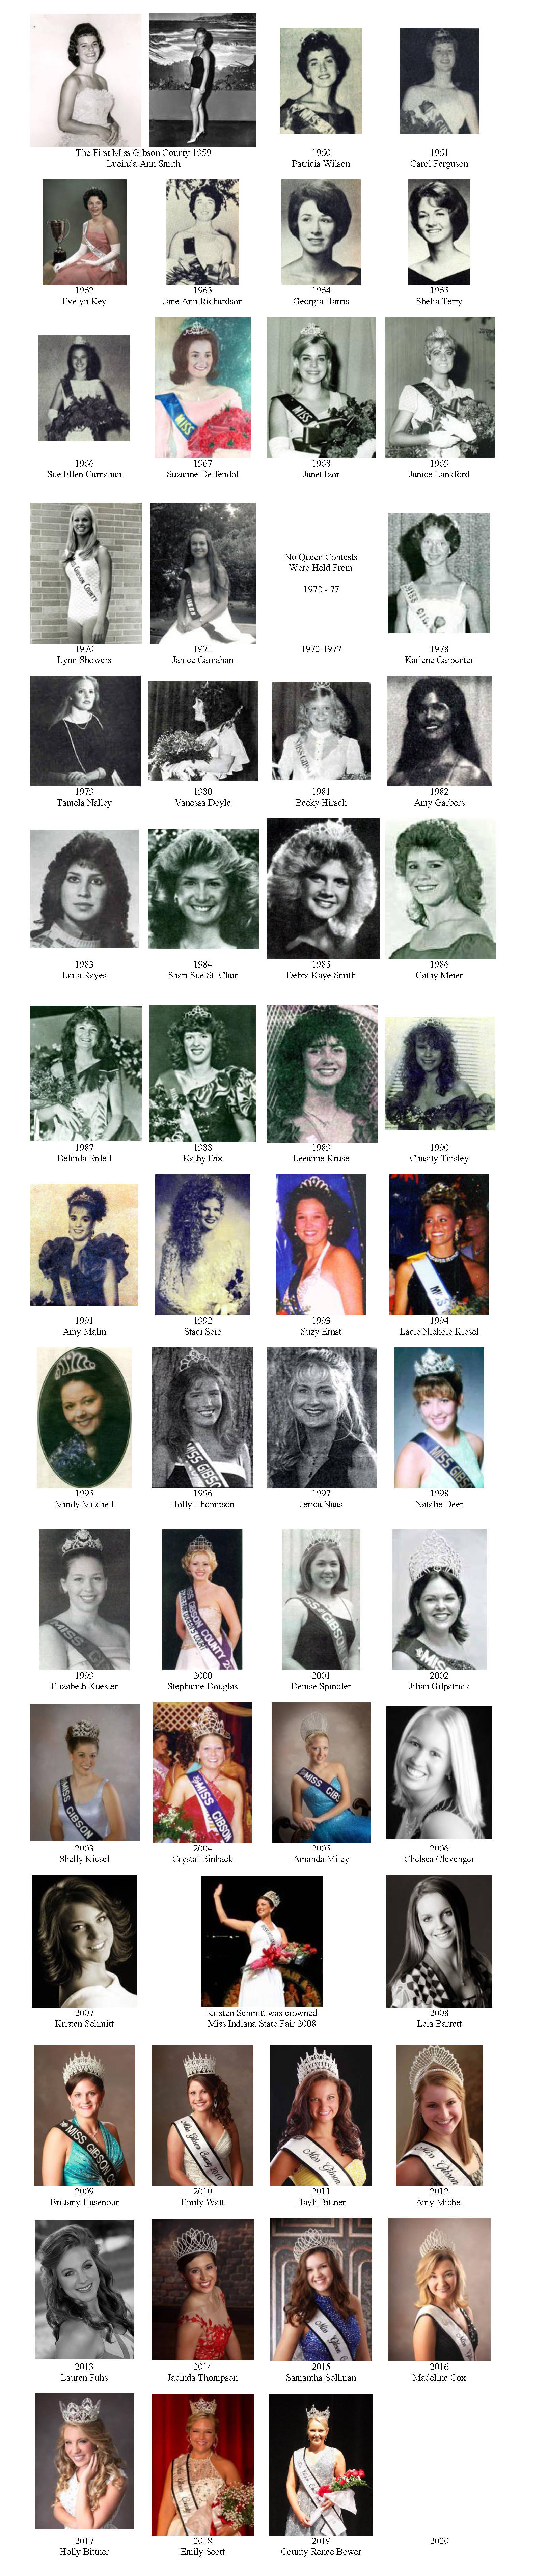 Previous Miss Gibson County Queens